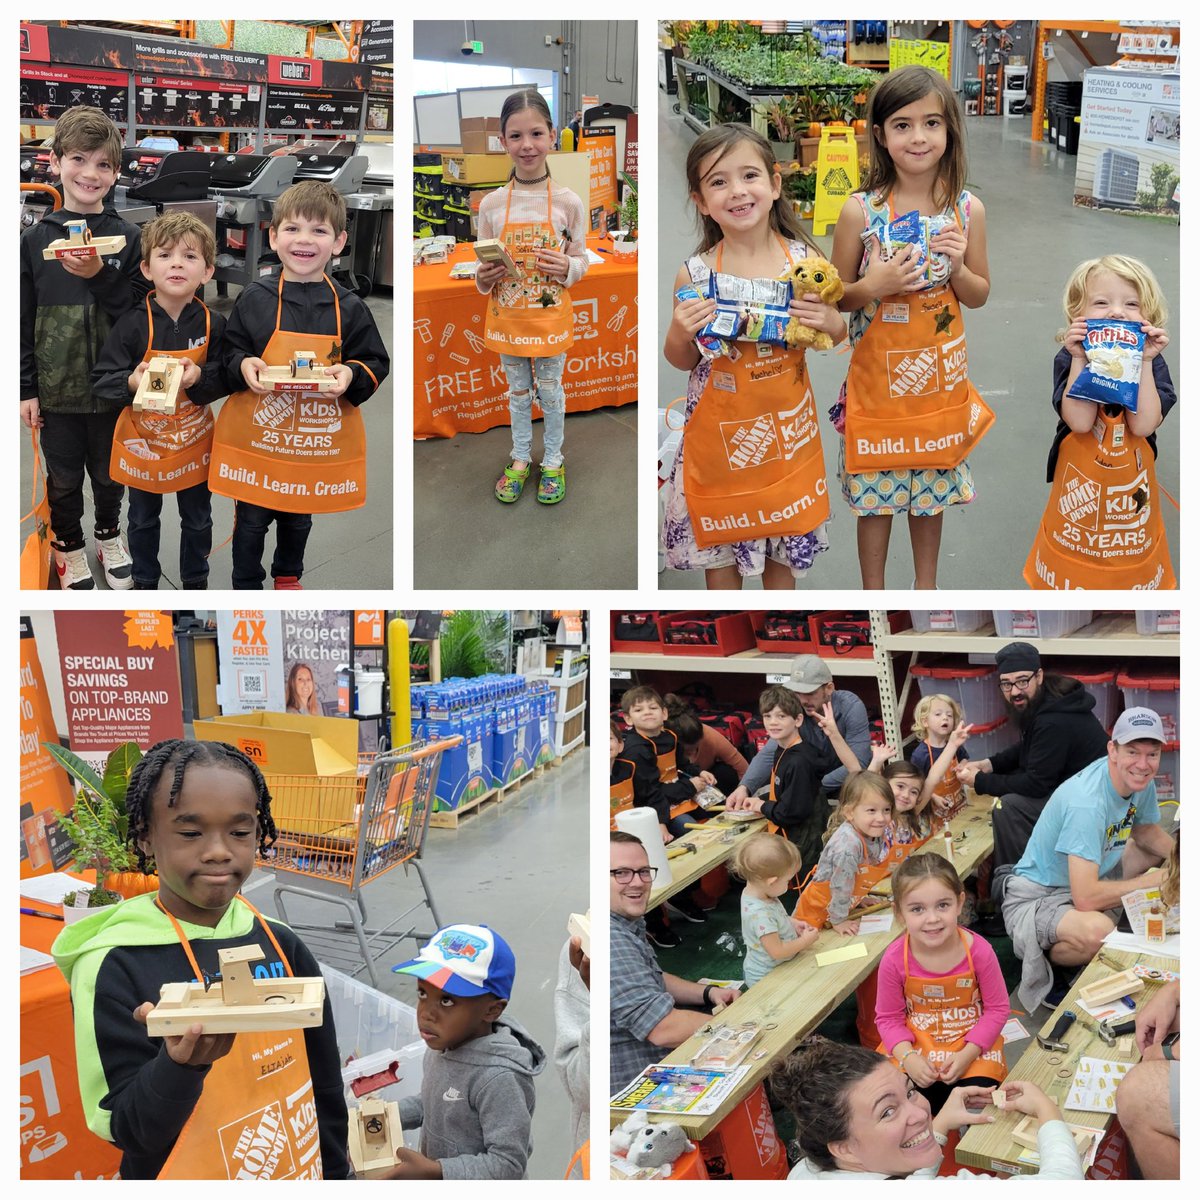 A big shout out to everyone who came out today to participate in our October workshop. @HillaryHyatt @thd4624 @kmn293 it was great fun. Special shoutout to Hanover County Sheriff's office for coming out and doing ID kits for all the kids